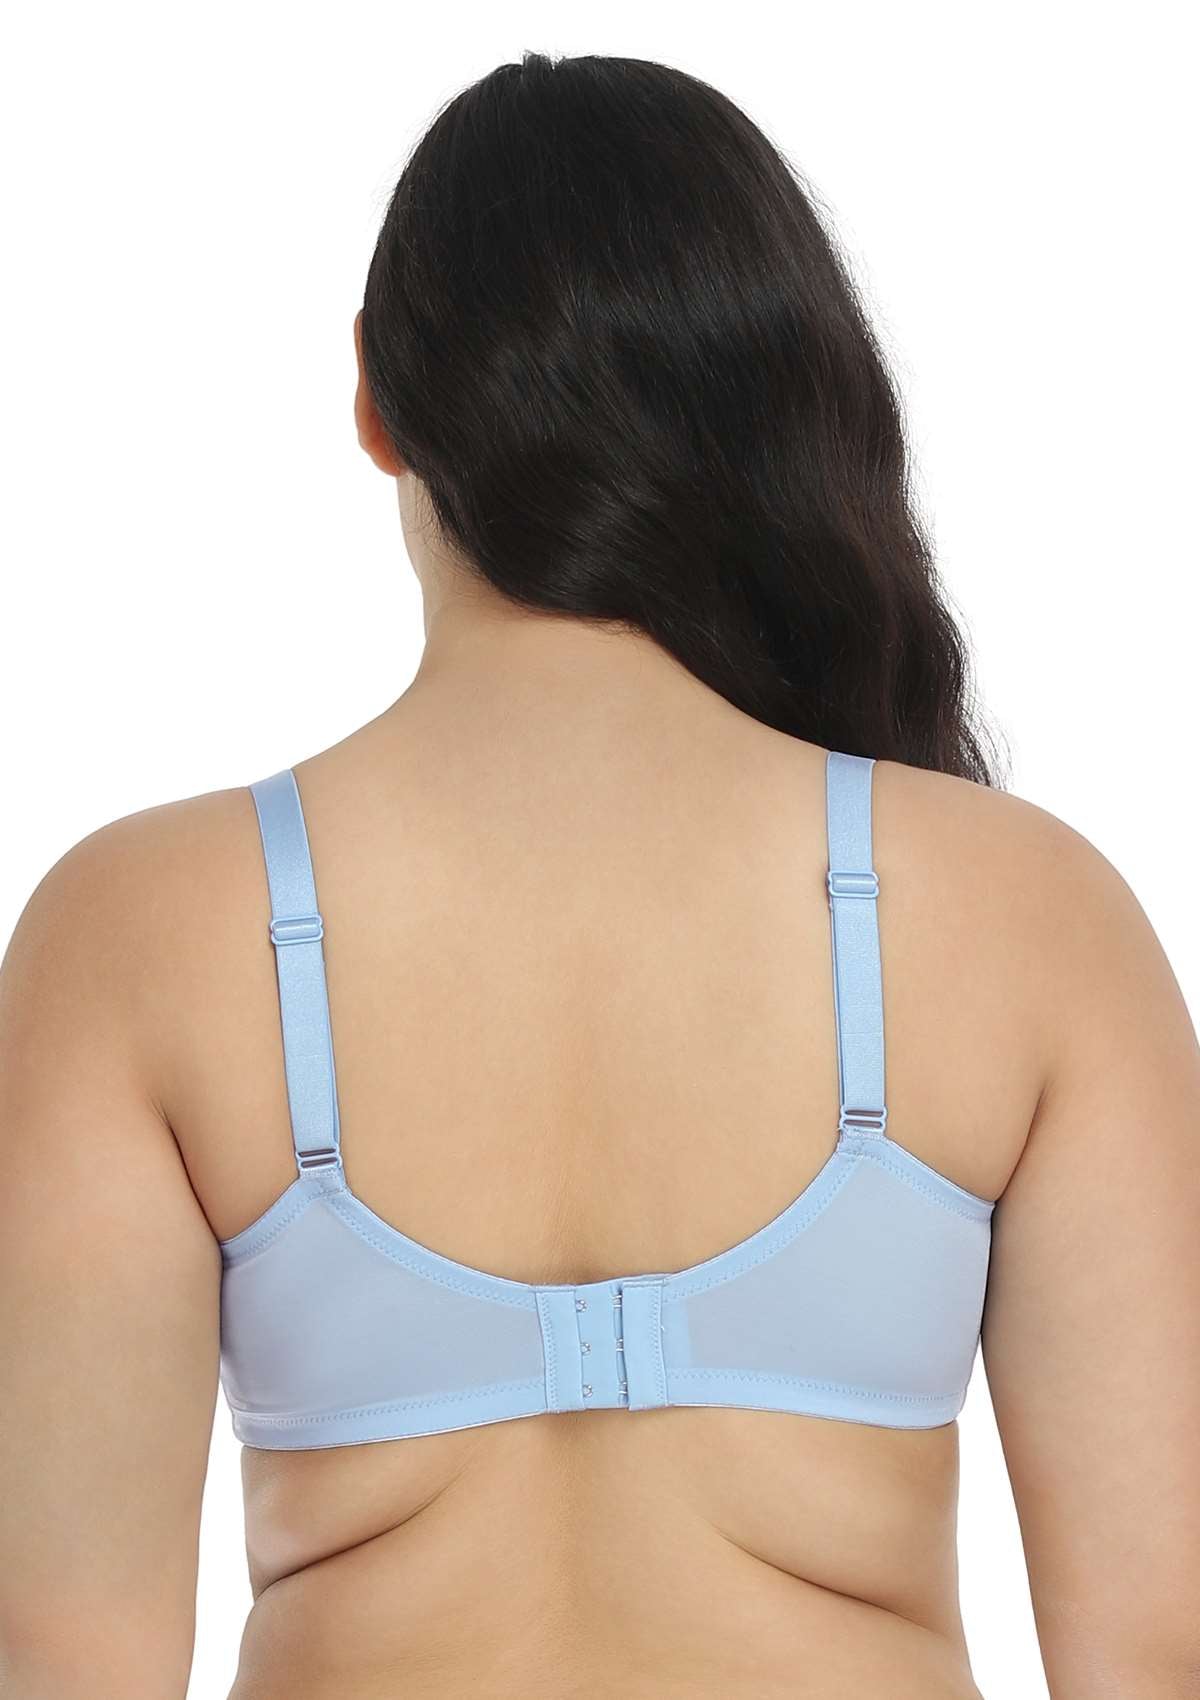 HSIA Pretty Secrets Lace-Trimmed Full Coverage Underwire Bra For Support - Light Blue / 46 / D